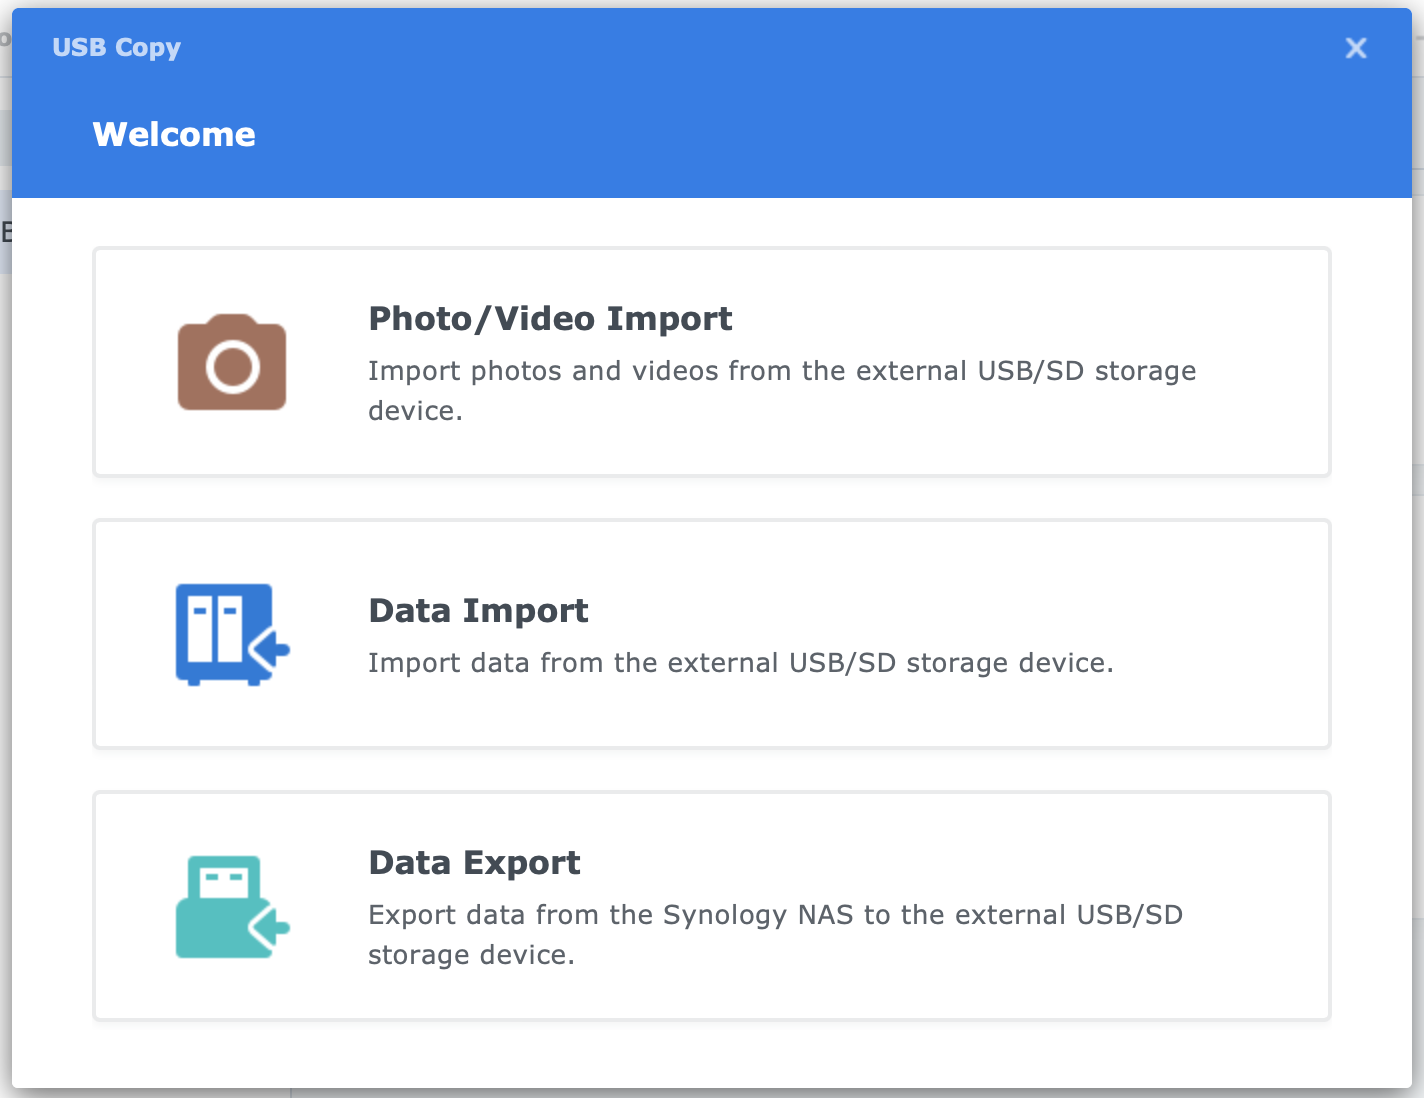 synology, usb copy, welcome to create task, dsm7